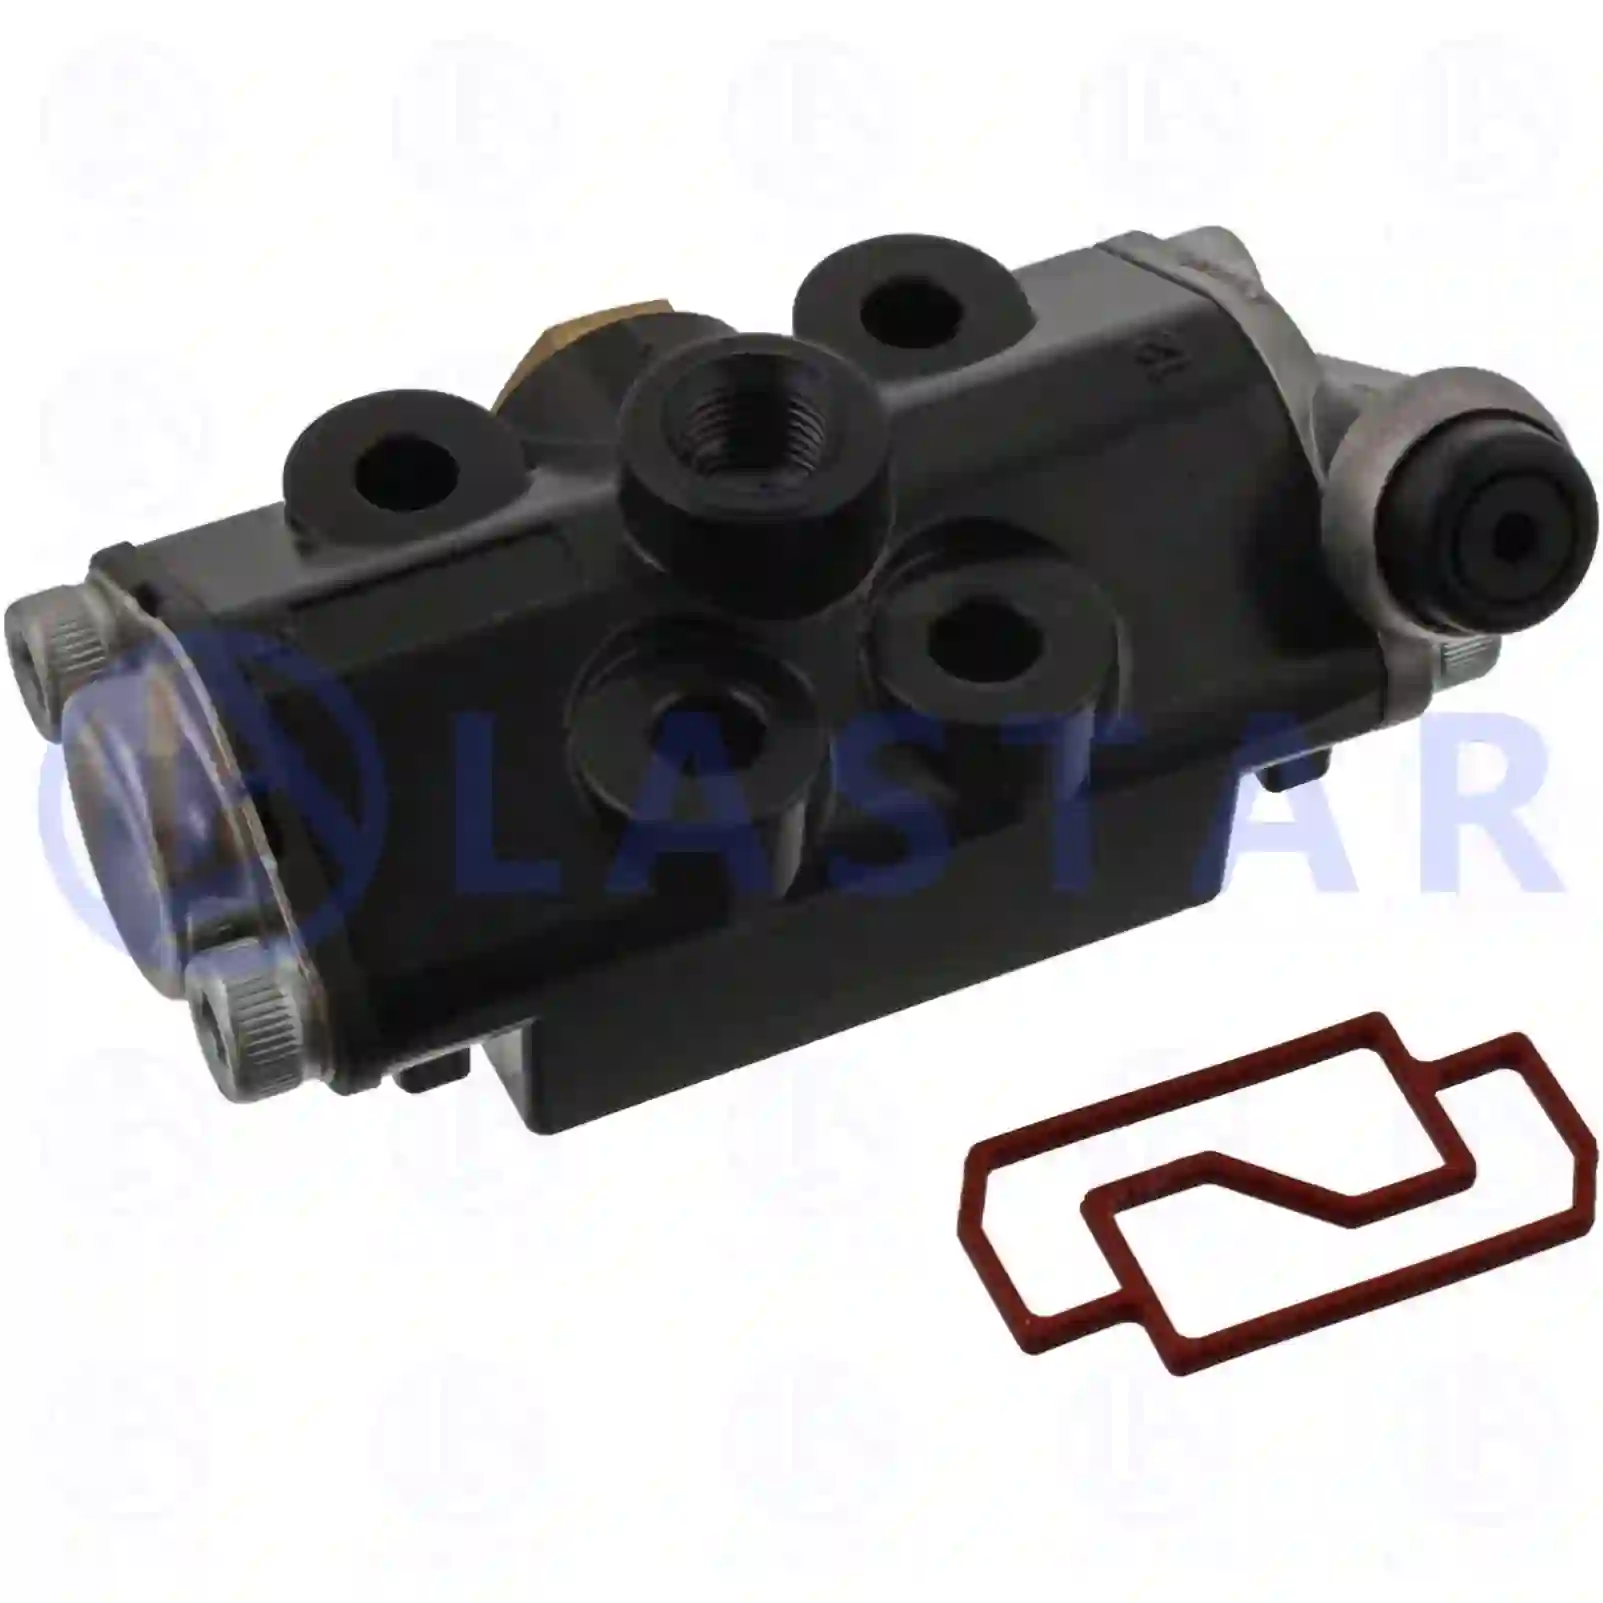 Relay valve, gearbox, 77732192, 7420775168, 20775168, 8171245 ||  77732192 Lastar Spare Part | Truck Spare Parts, Auotomotive Spare Parts Relay valve, gearbox, 77732192, 7420775168, 20775168, 8171245 ||  77732192 Lastar Spare Part | Truck Spare Parts, Auotomotive Spare Parts